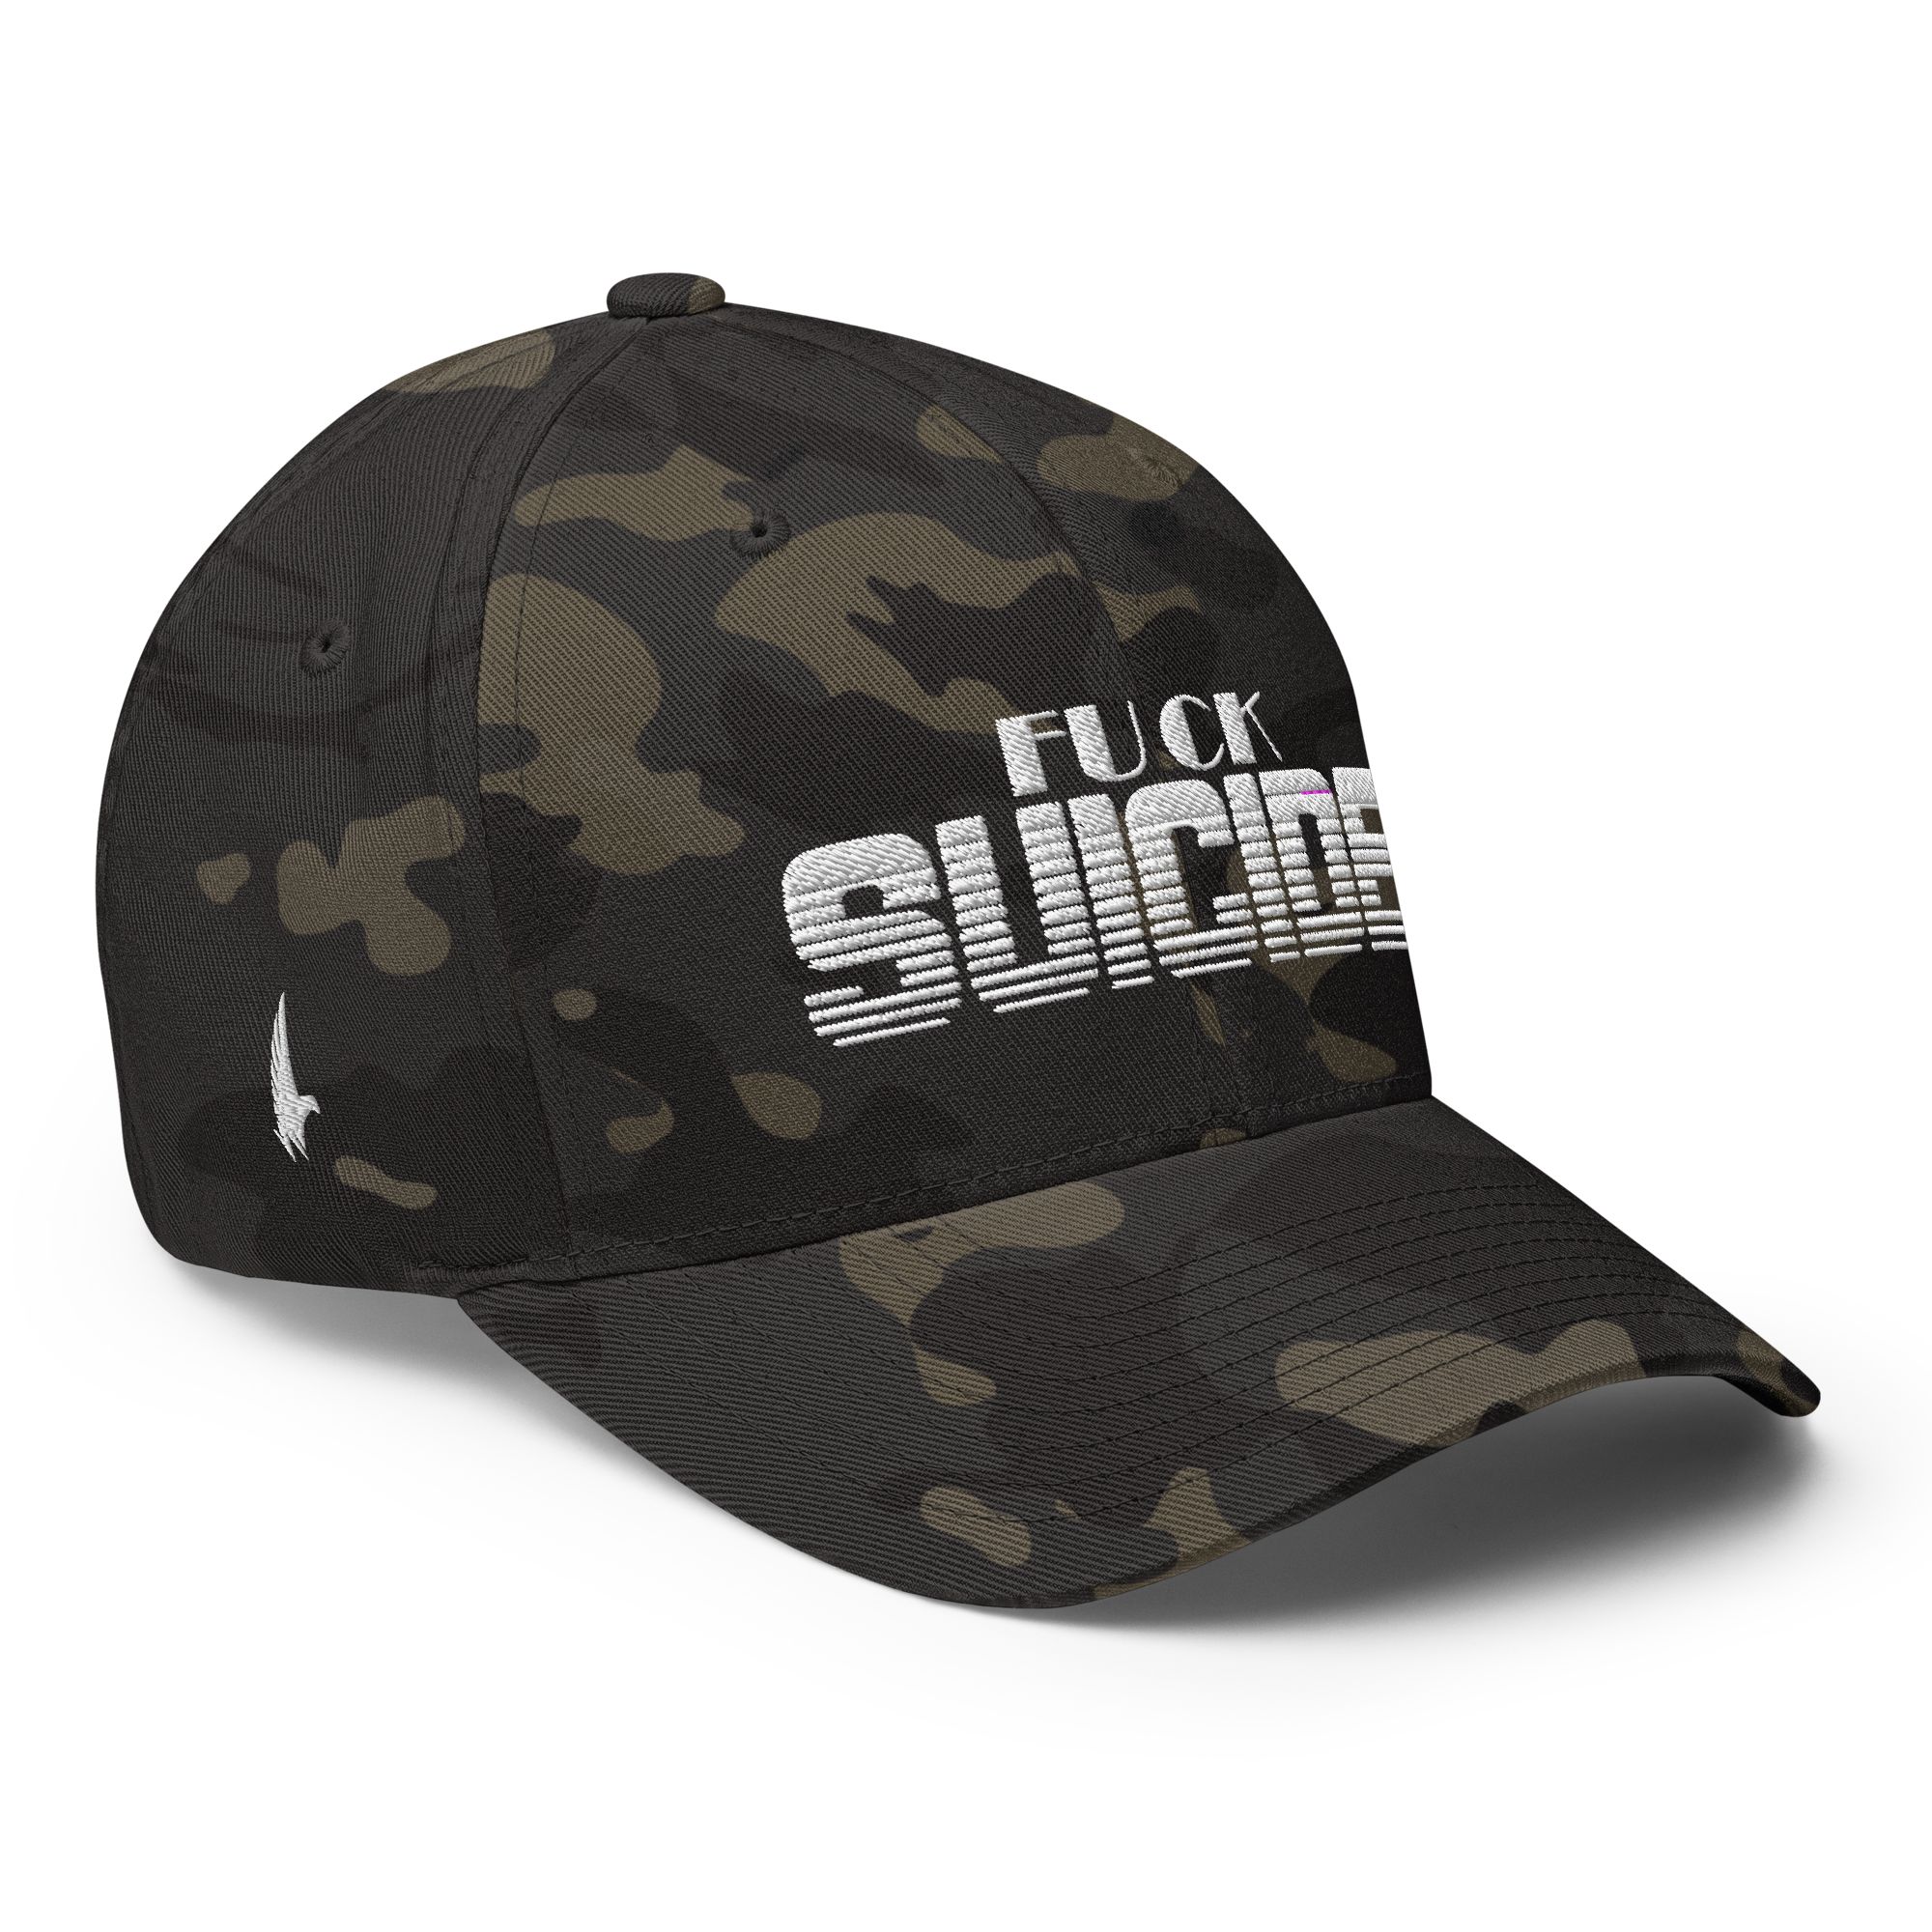 Fk Suicide Fitted Hat Urban Camo Fitted - Loyalty Vibes